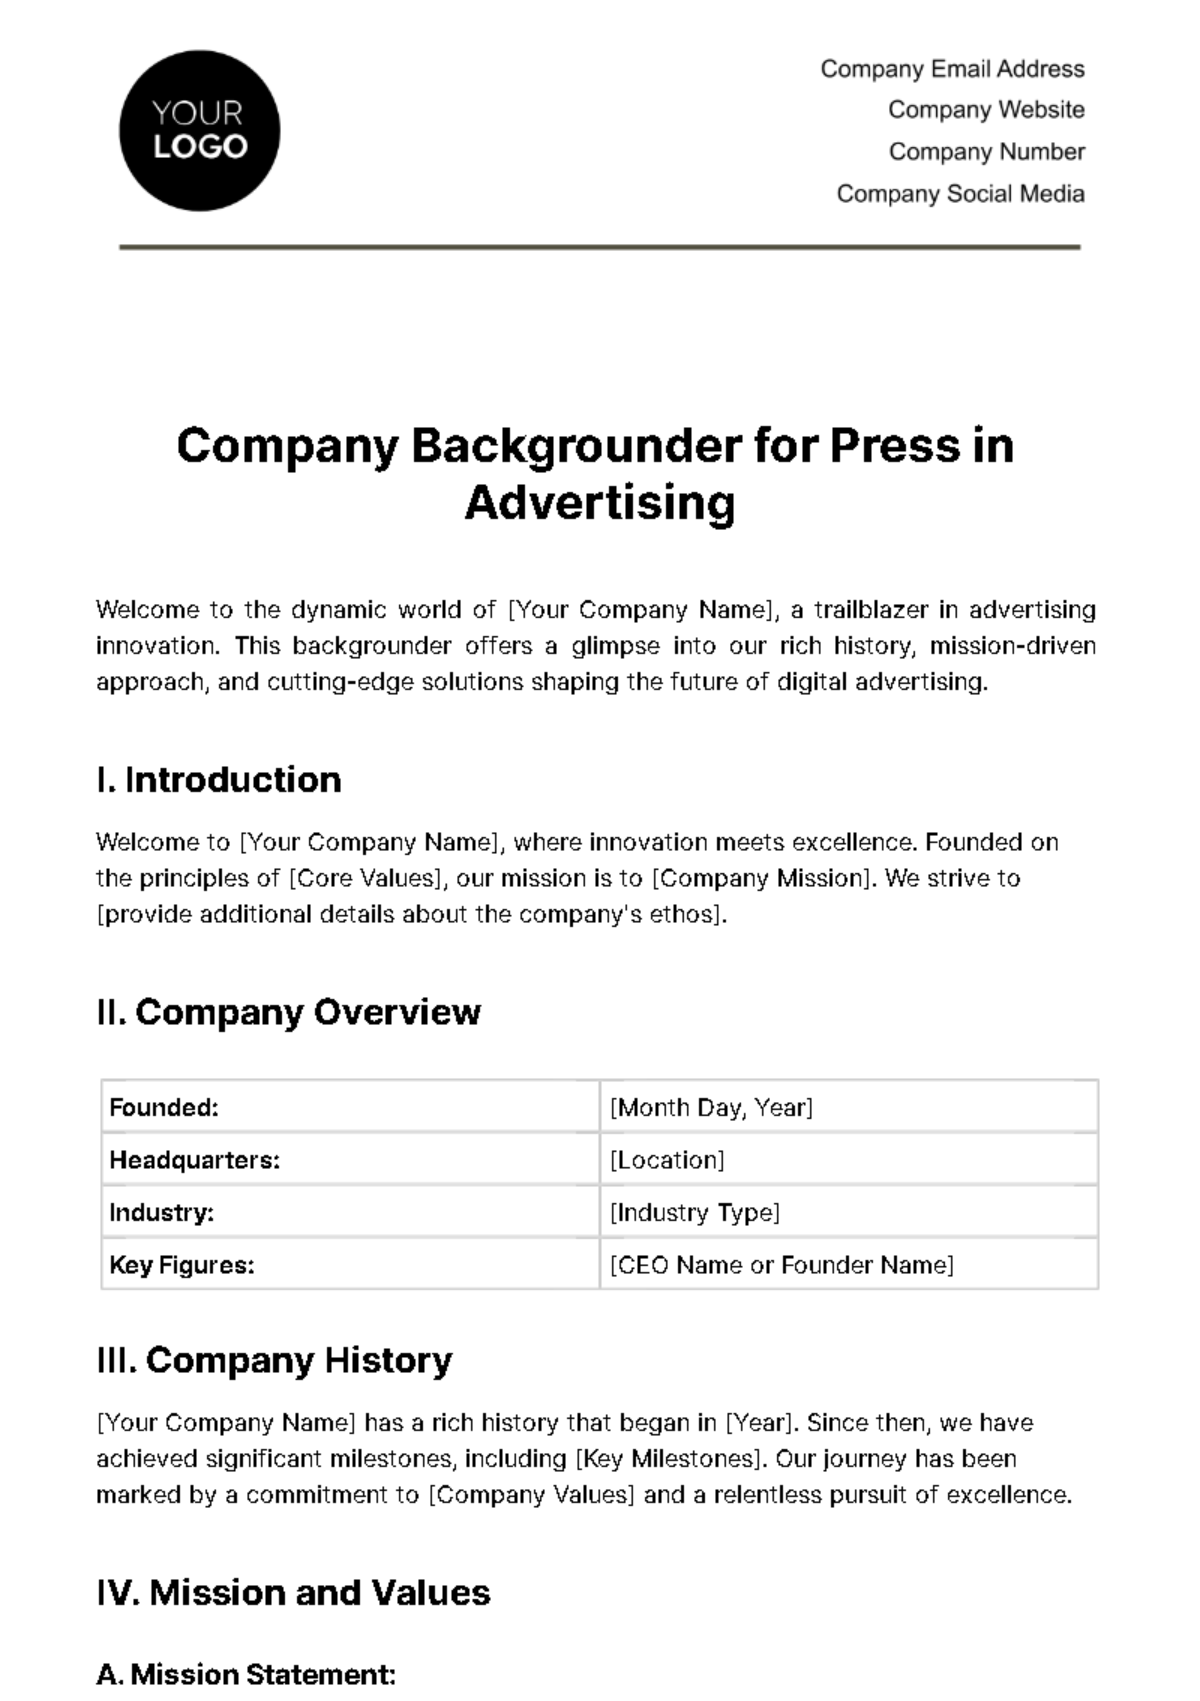 Free Company Backgrounder for Press in Advertising Template 